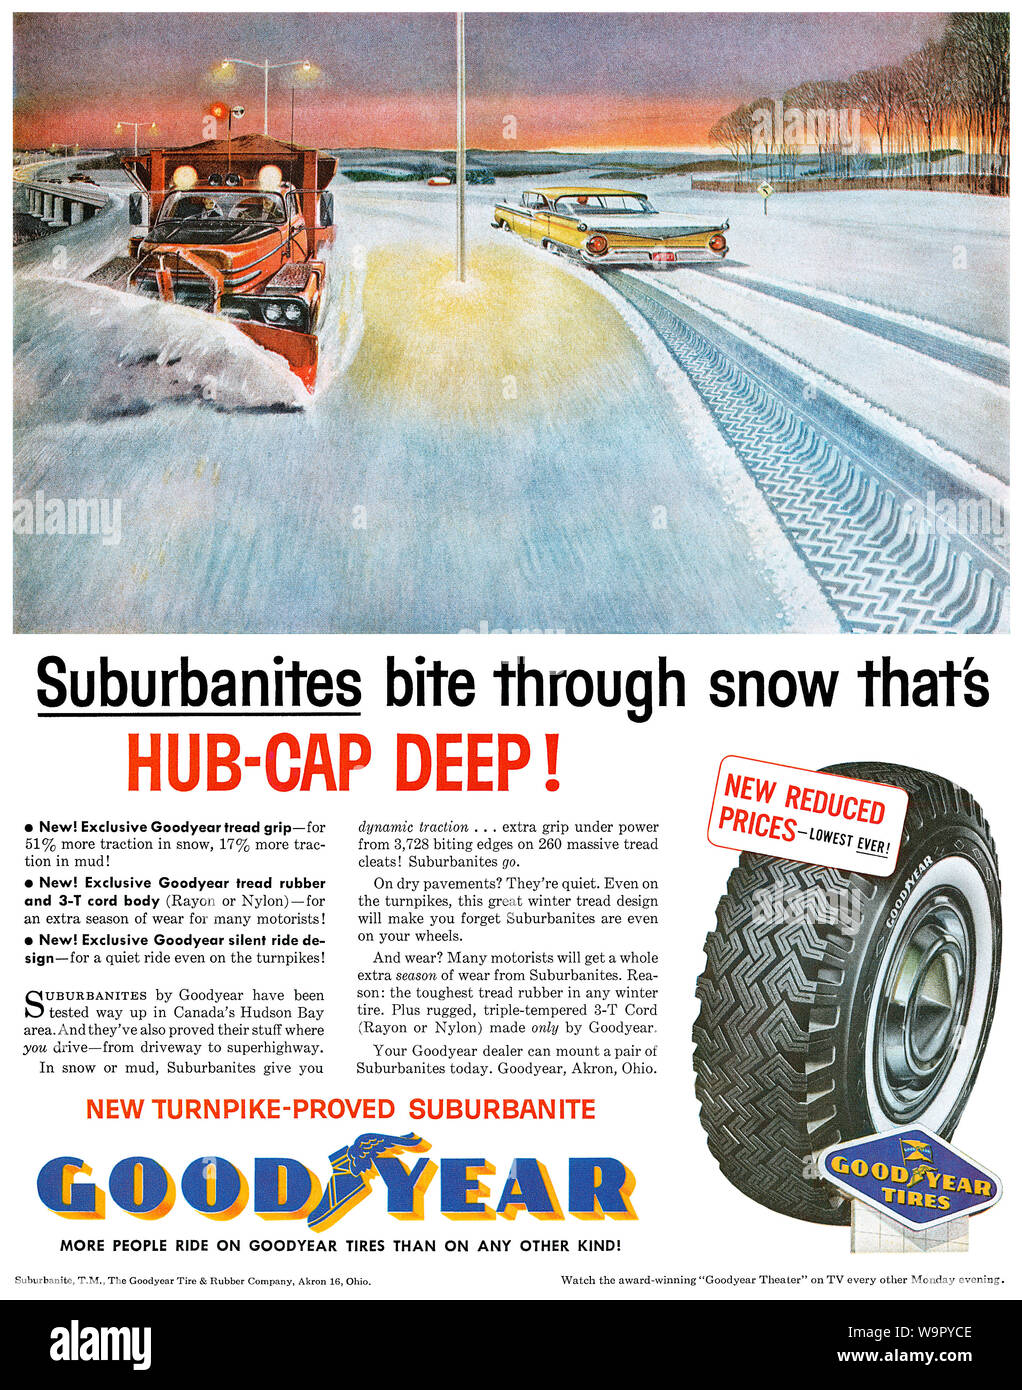 1959 U.S. advertisement for Goodyear tires. Stock Photo